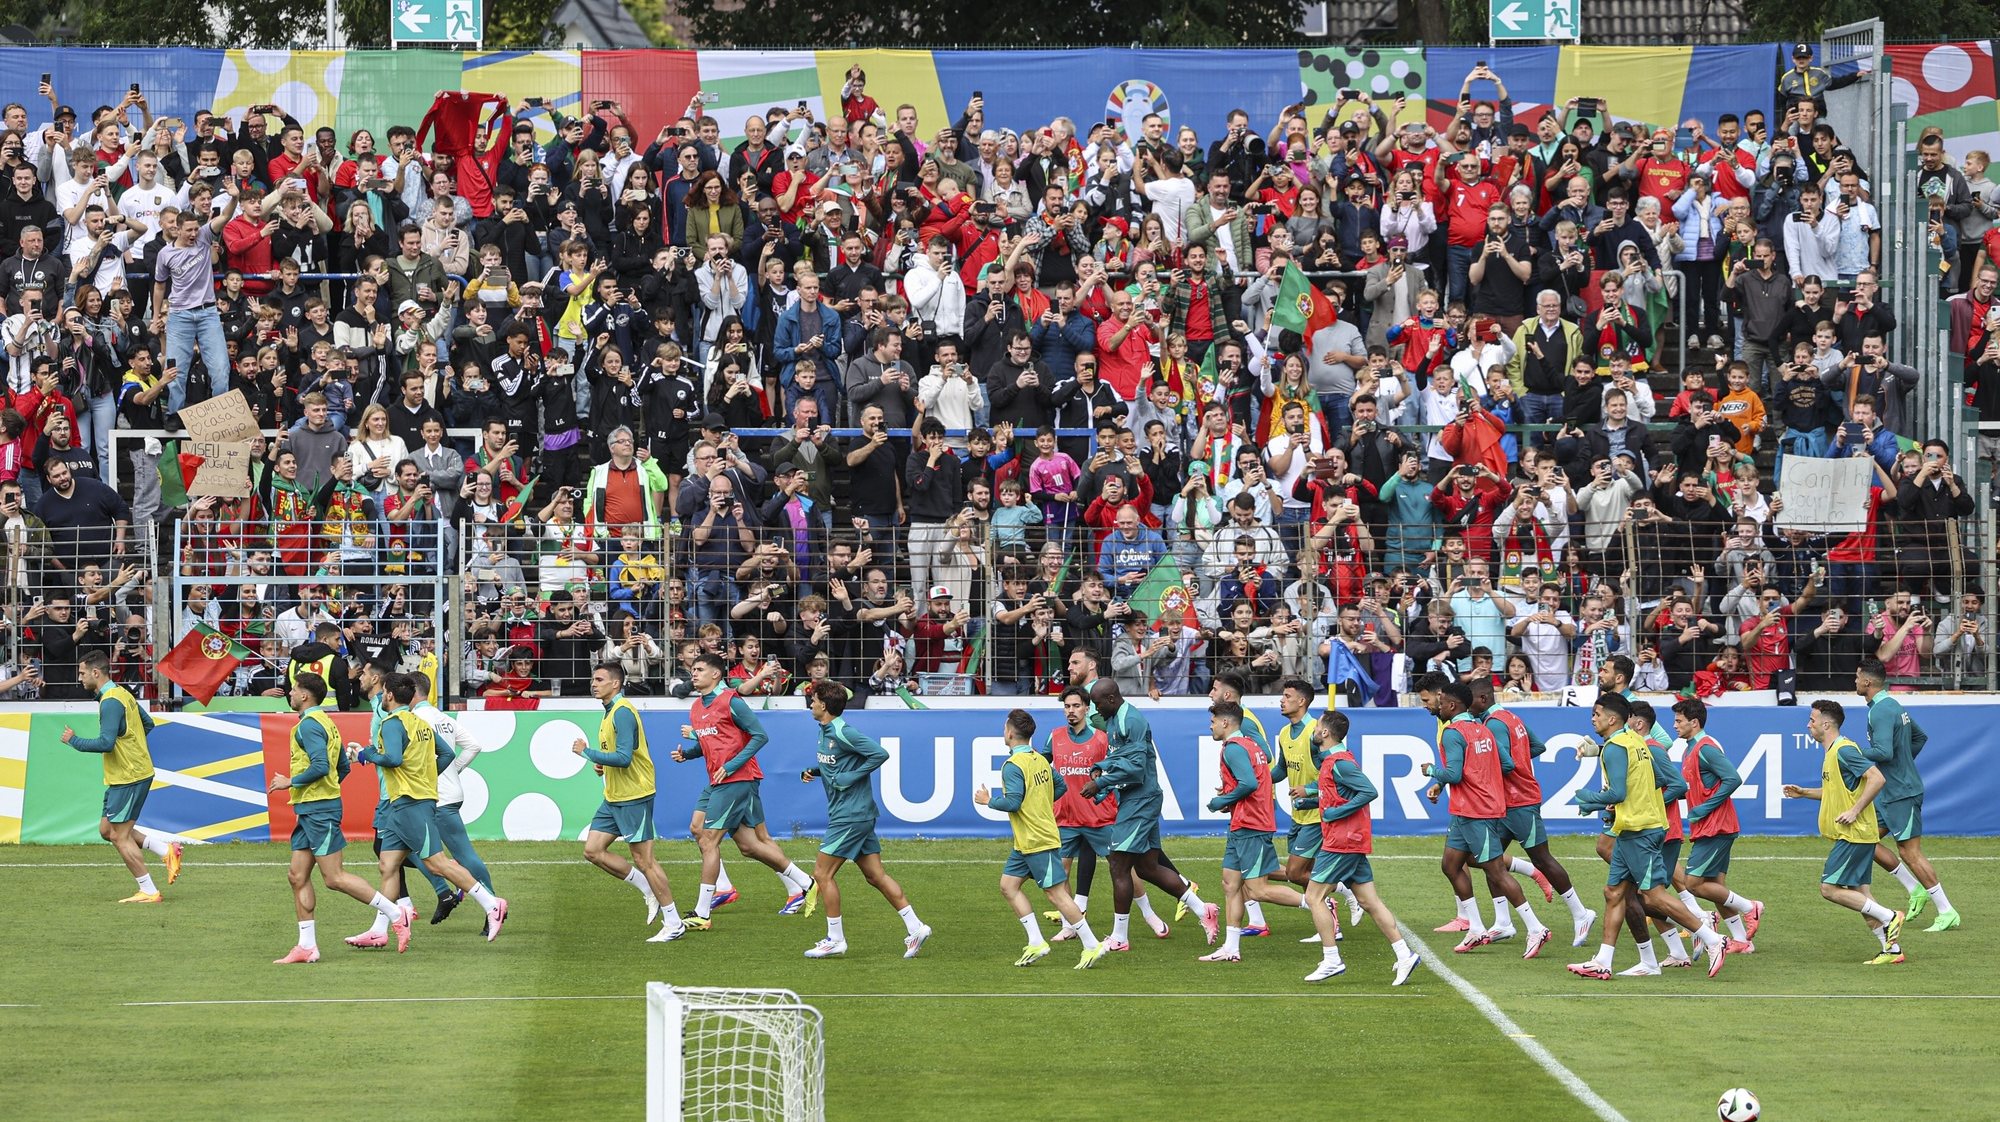 Portugal national soccer team during a training session open to the public at Heidewaldstadion in Gütersloh, Germany, 14 June 2024. The Portuguese national soccer team is based in Marienfeld, Harsewinkel during the UEFA EURO 2024. MIGUEL A. LOPES/LUSA